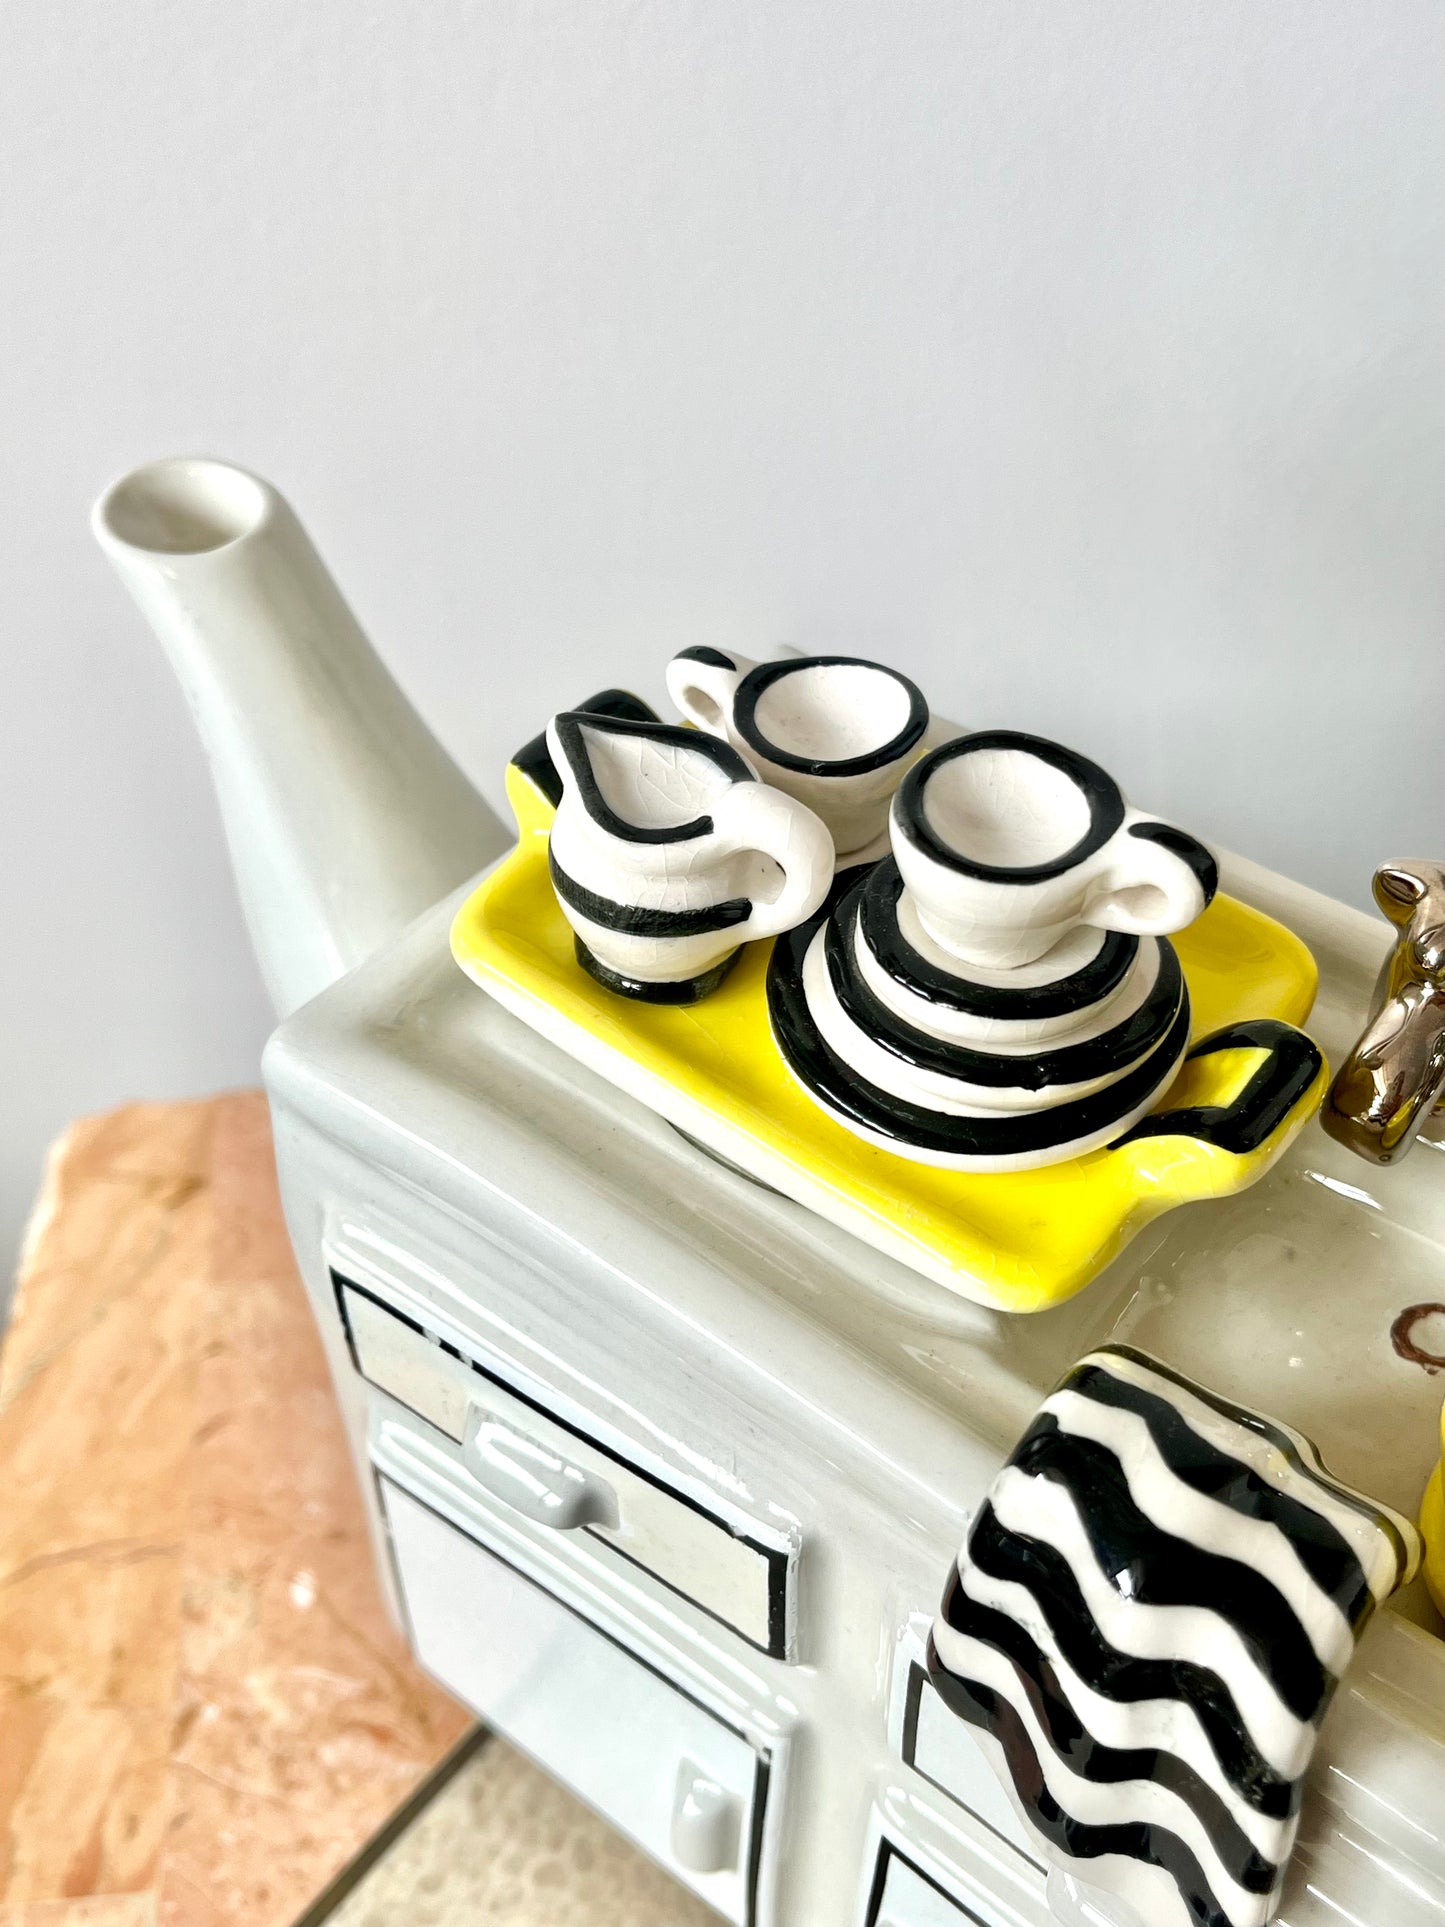 Vintage 1989 Sink-themed Teapot by South-West Ceramics